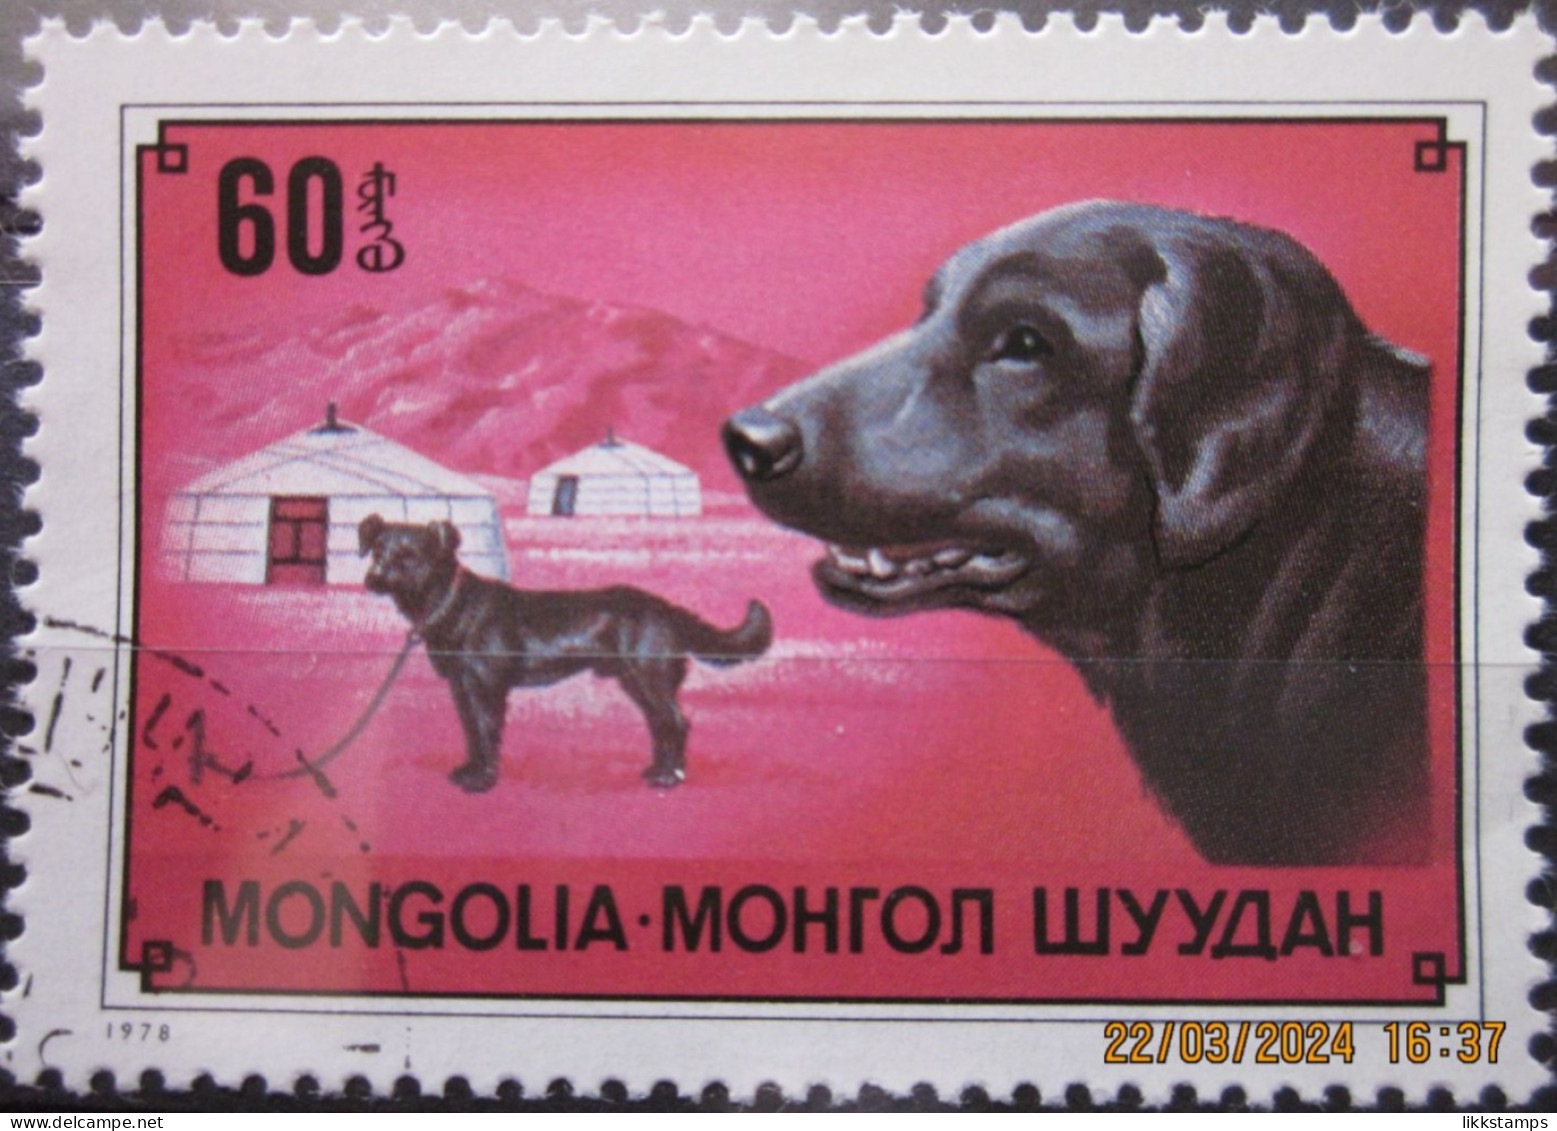 MONGOLIA ~ 1978 ~ S.G. NUMBERS 1157, ~ DOGS. ~ VFU #03479 - Mongolie